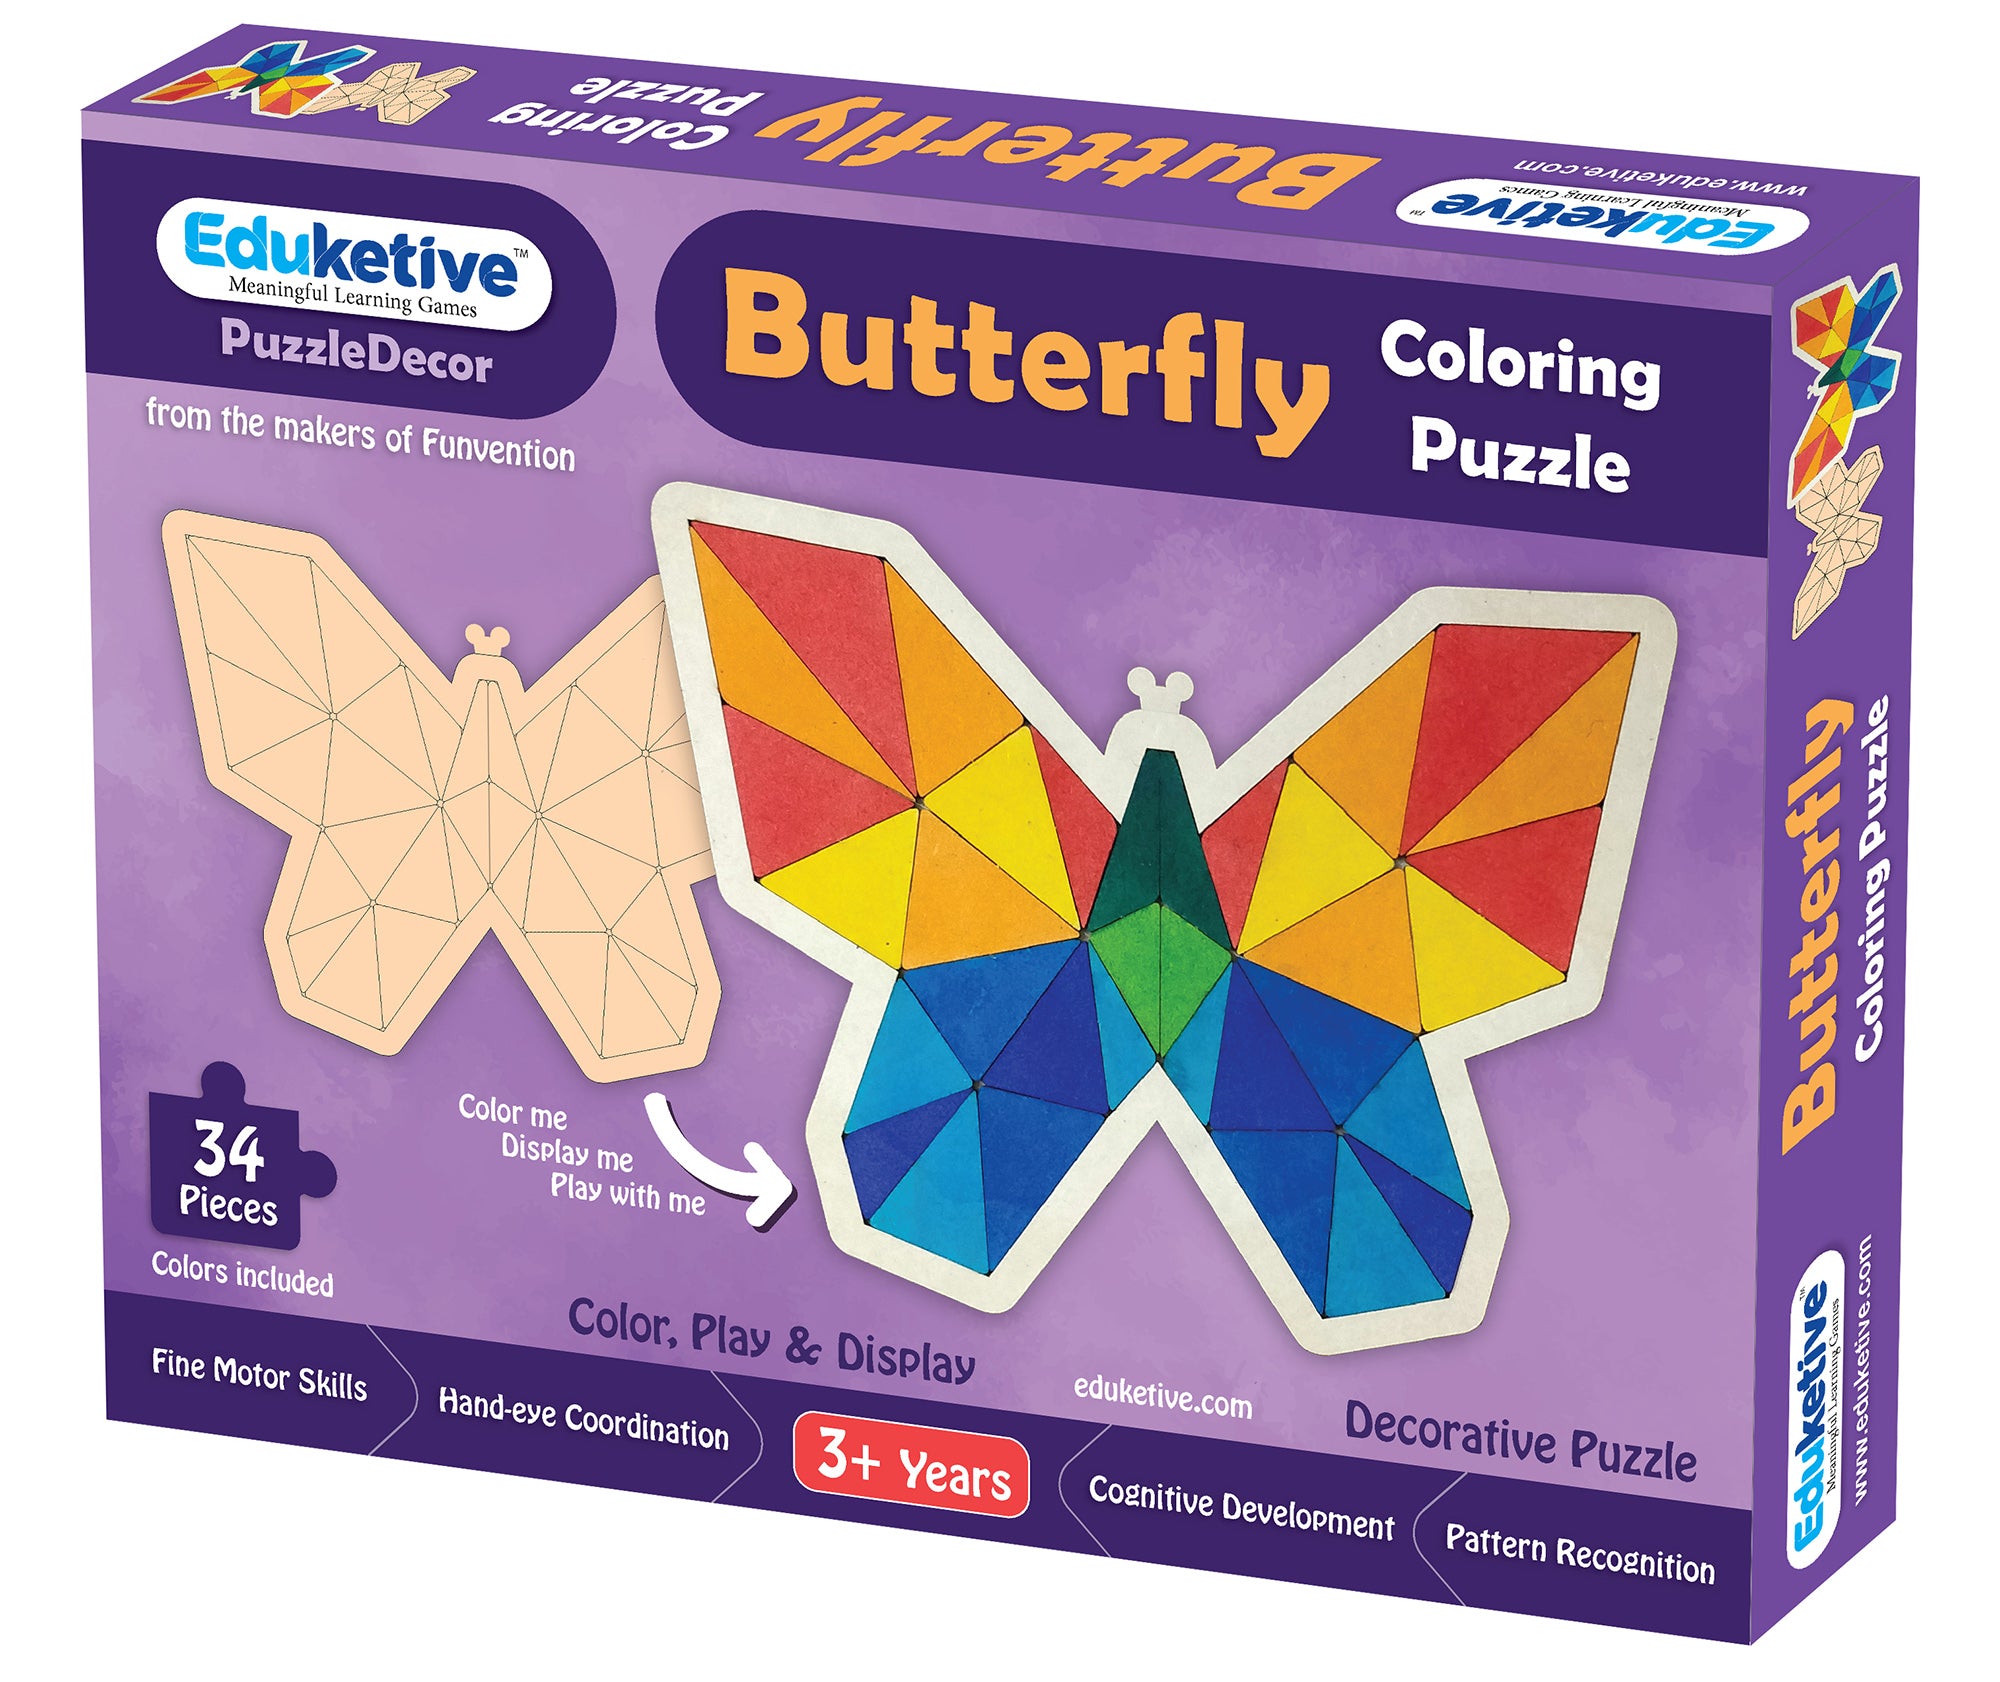 Butterfly - Coloring Puzzle